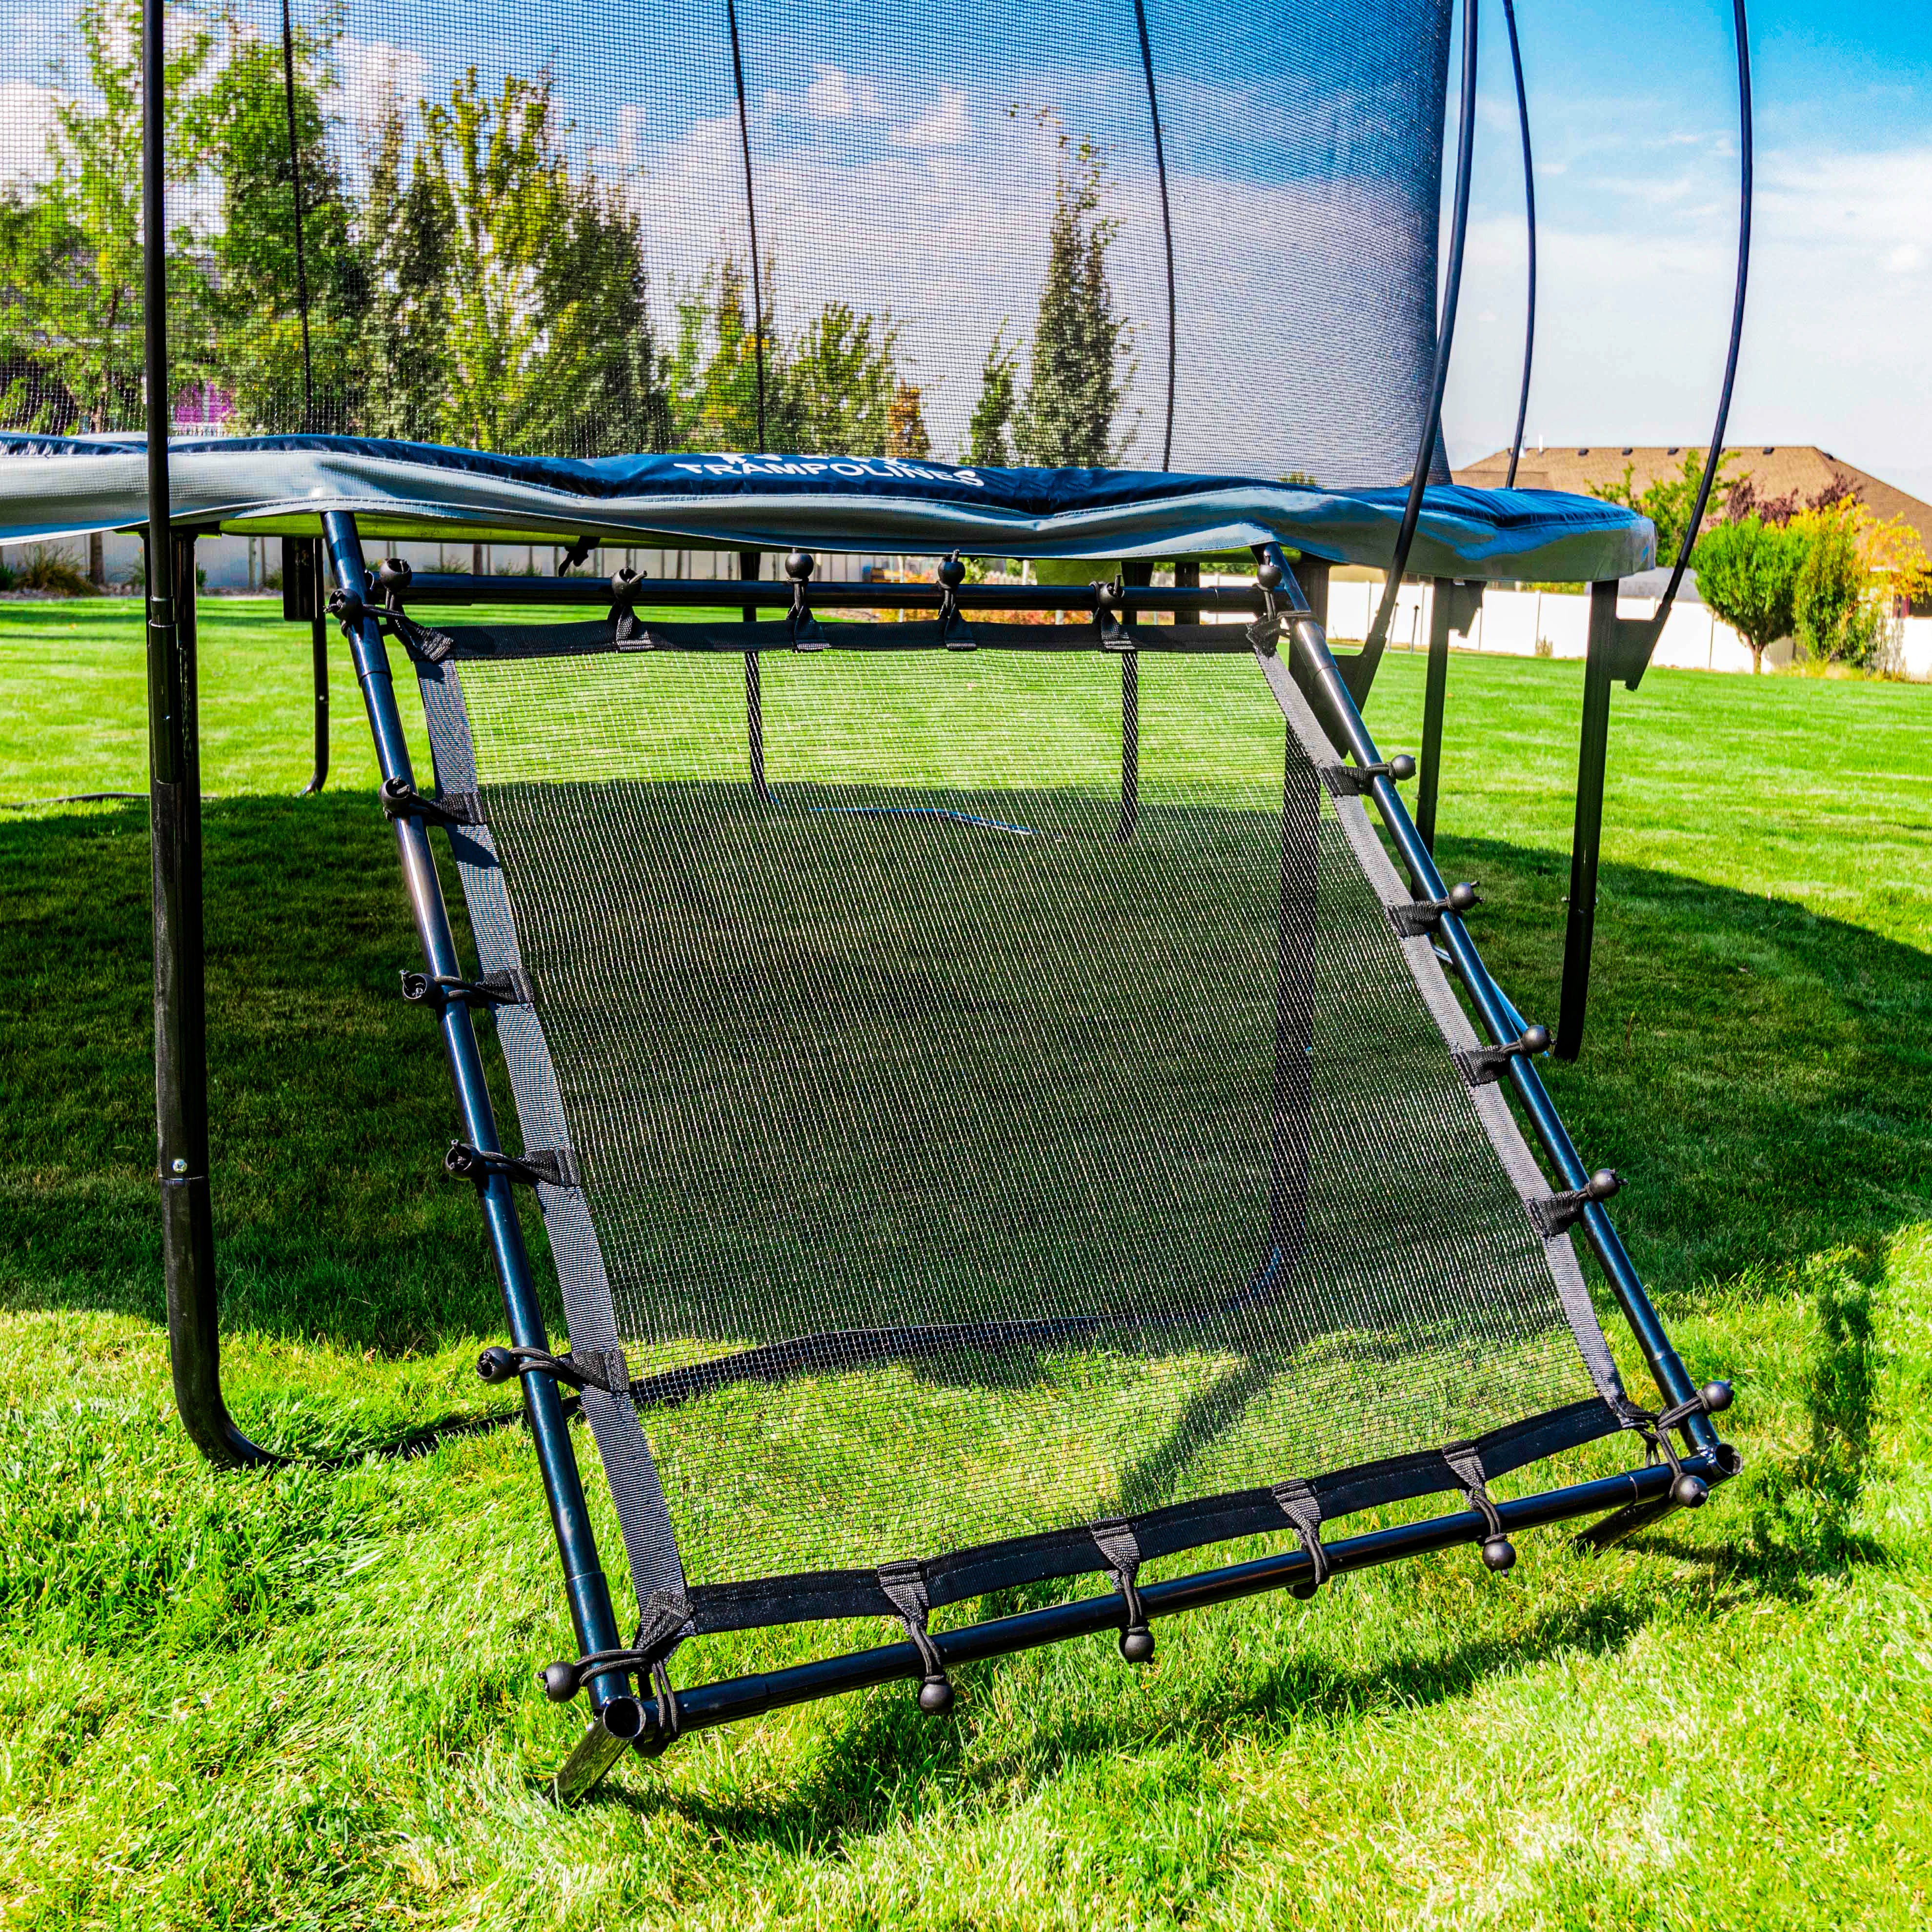 Half of the rebounder attaches to the frame of a trampoline.